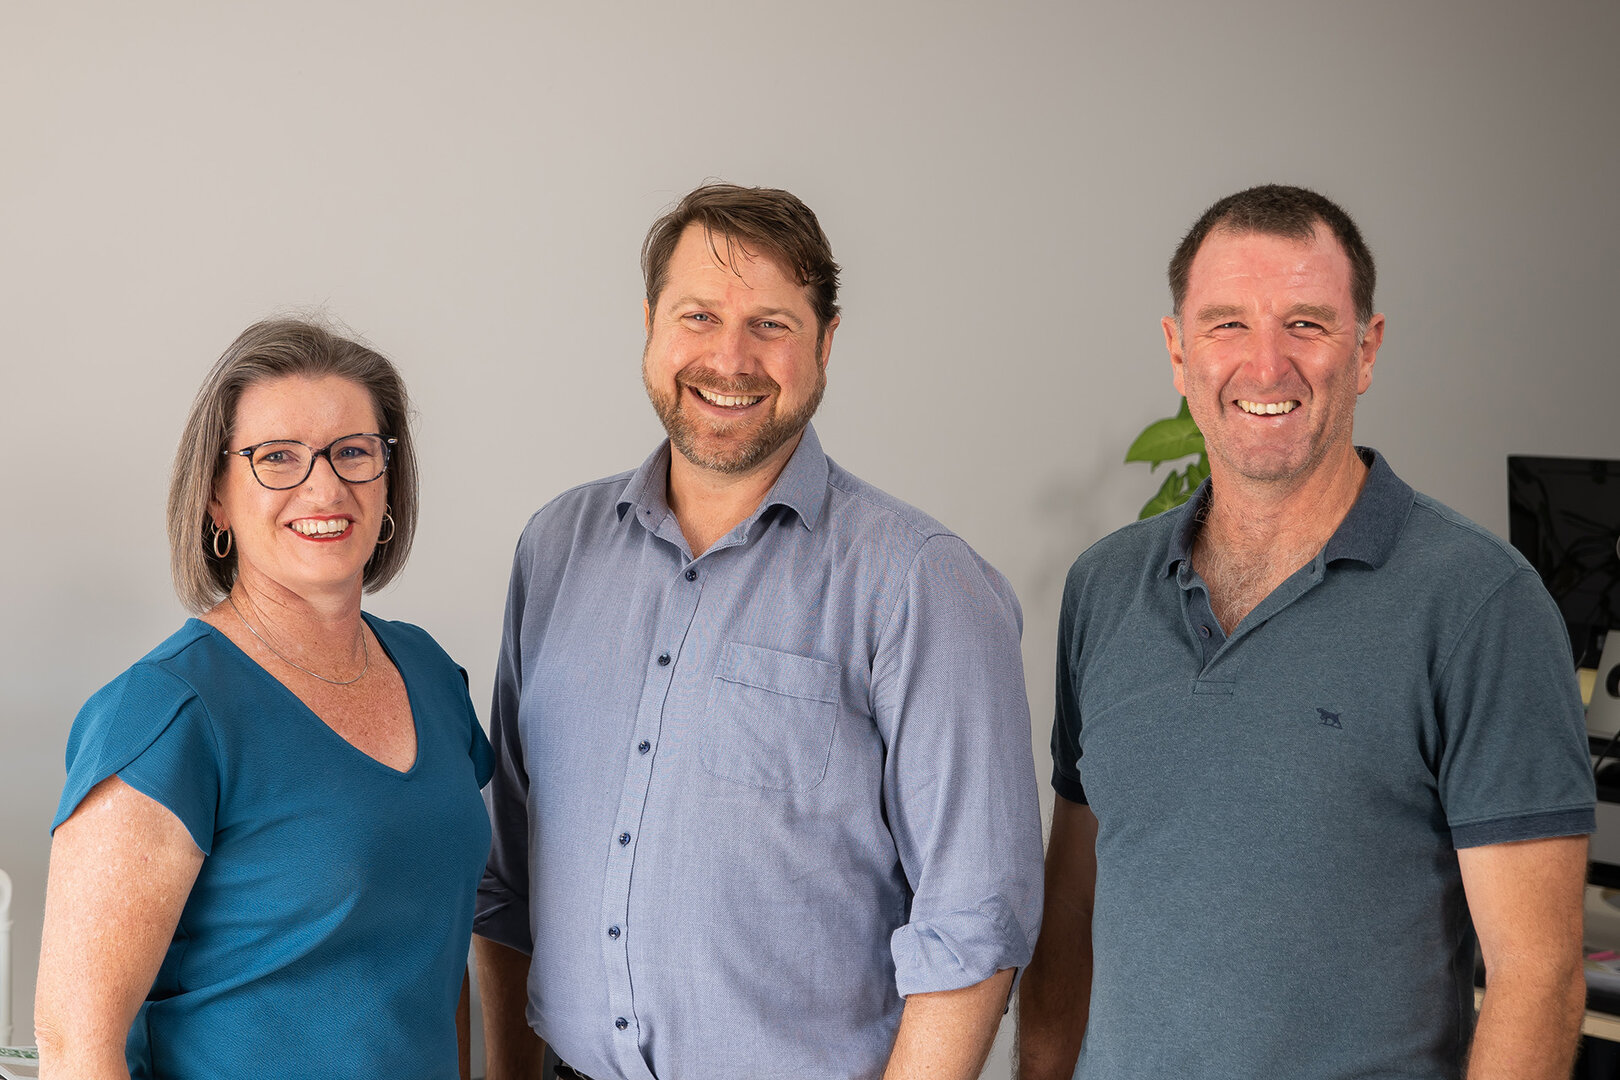 Majella, Paul, and Keith stand together for a photo in their office.